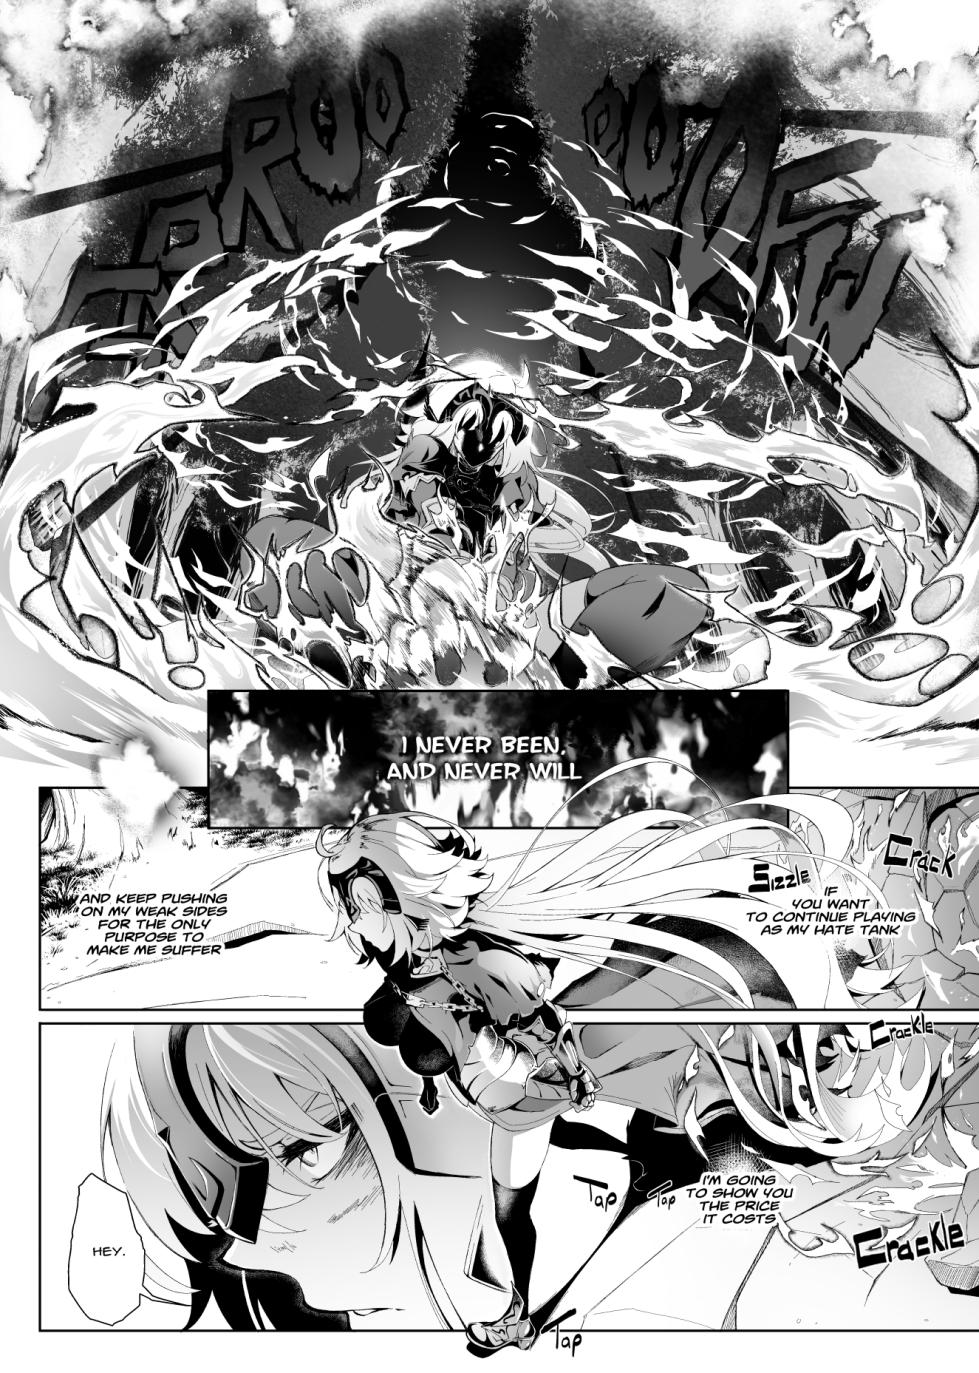 [Kid] The Baddest (Fate/Grand Order) - Page 8